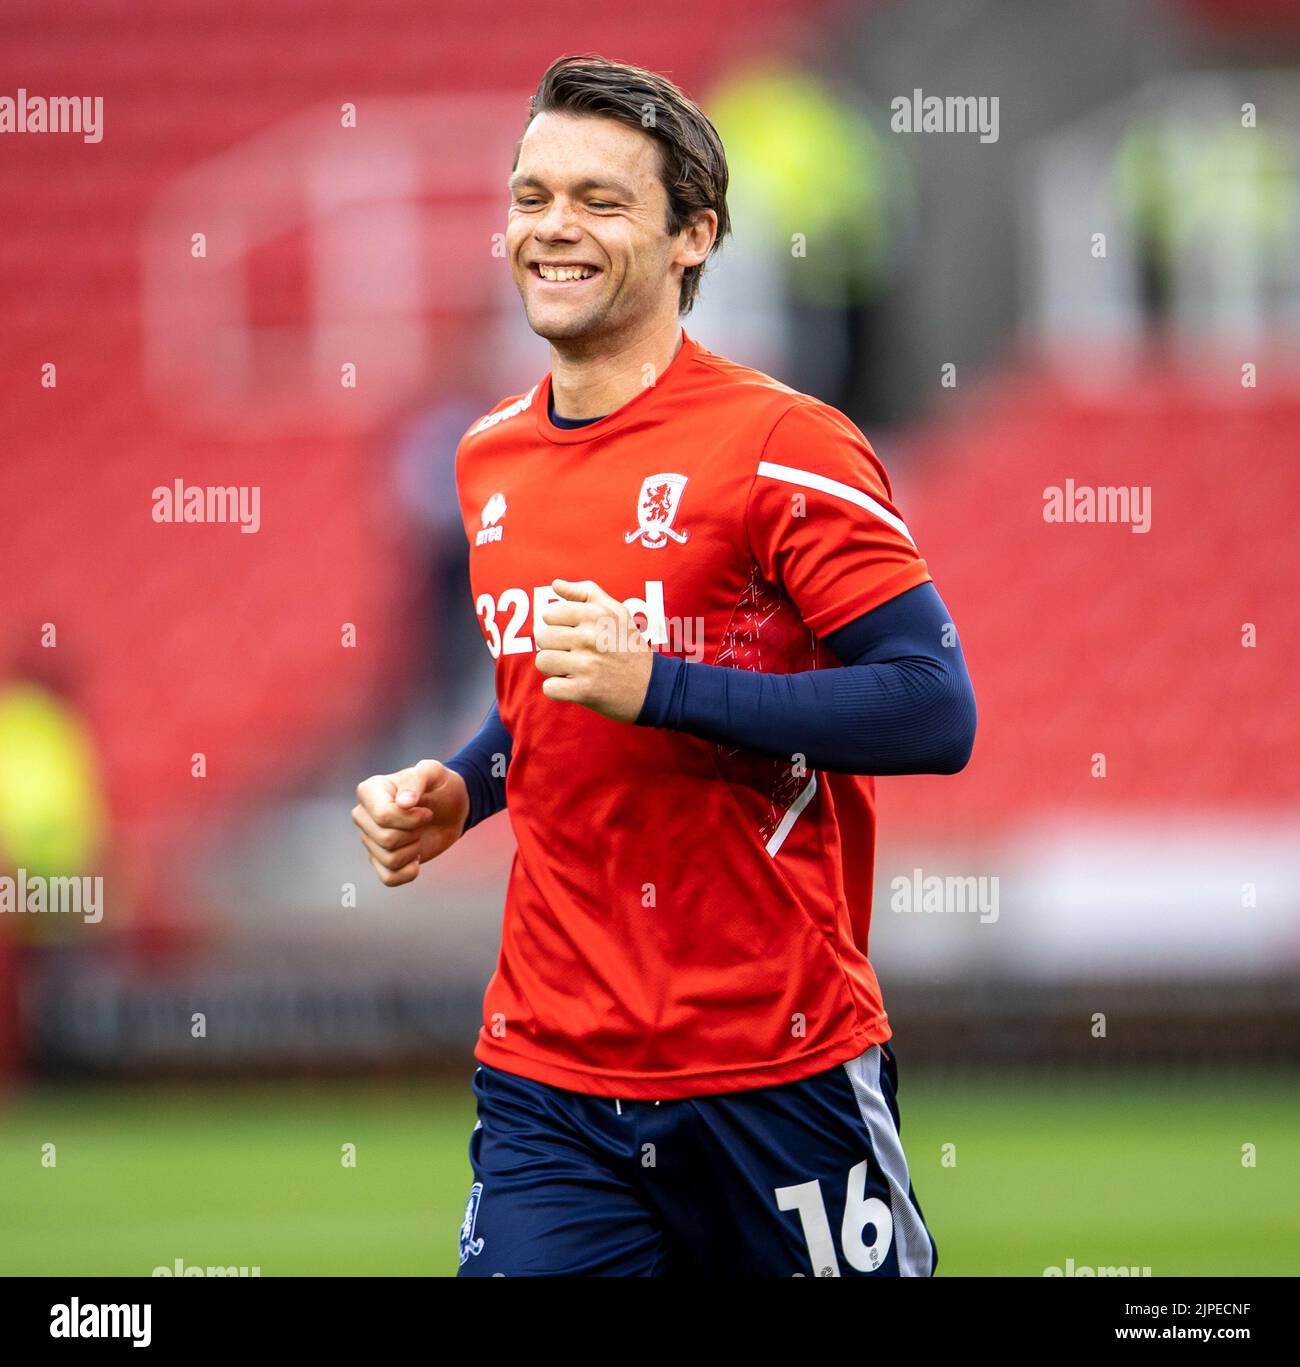 Stoke, Staffordshire, UK. 17th August 2022;  Bet365 Stadium, Stoke, Staffordshire, England; Championship football, Stoke City versus Middlesbrough: A smiling Jonny Howson of Middlesbrough during the warm up Credit: Action Plus Sports Images/Alamy Live News Stock Photo